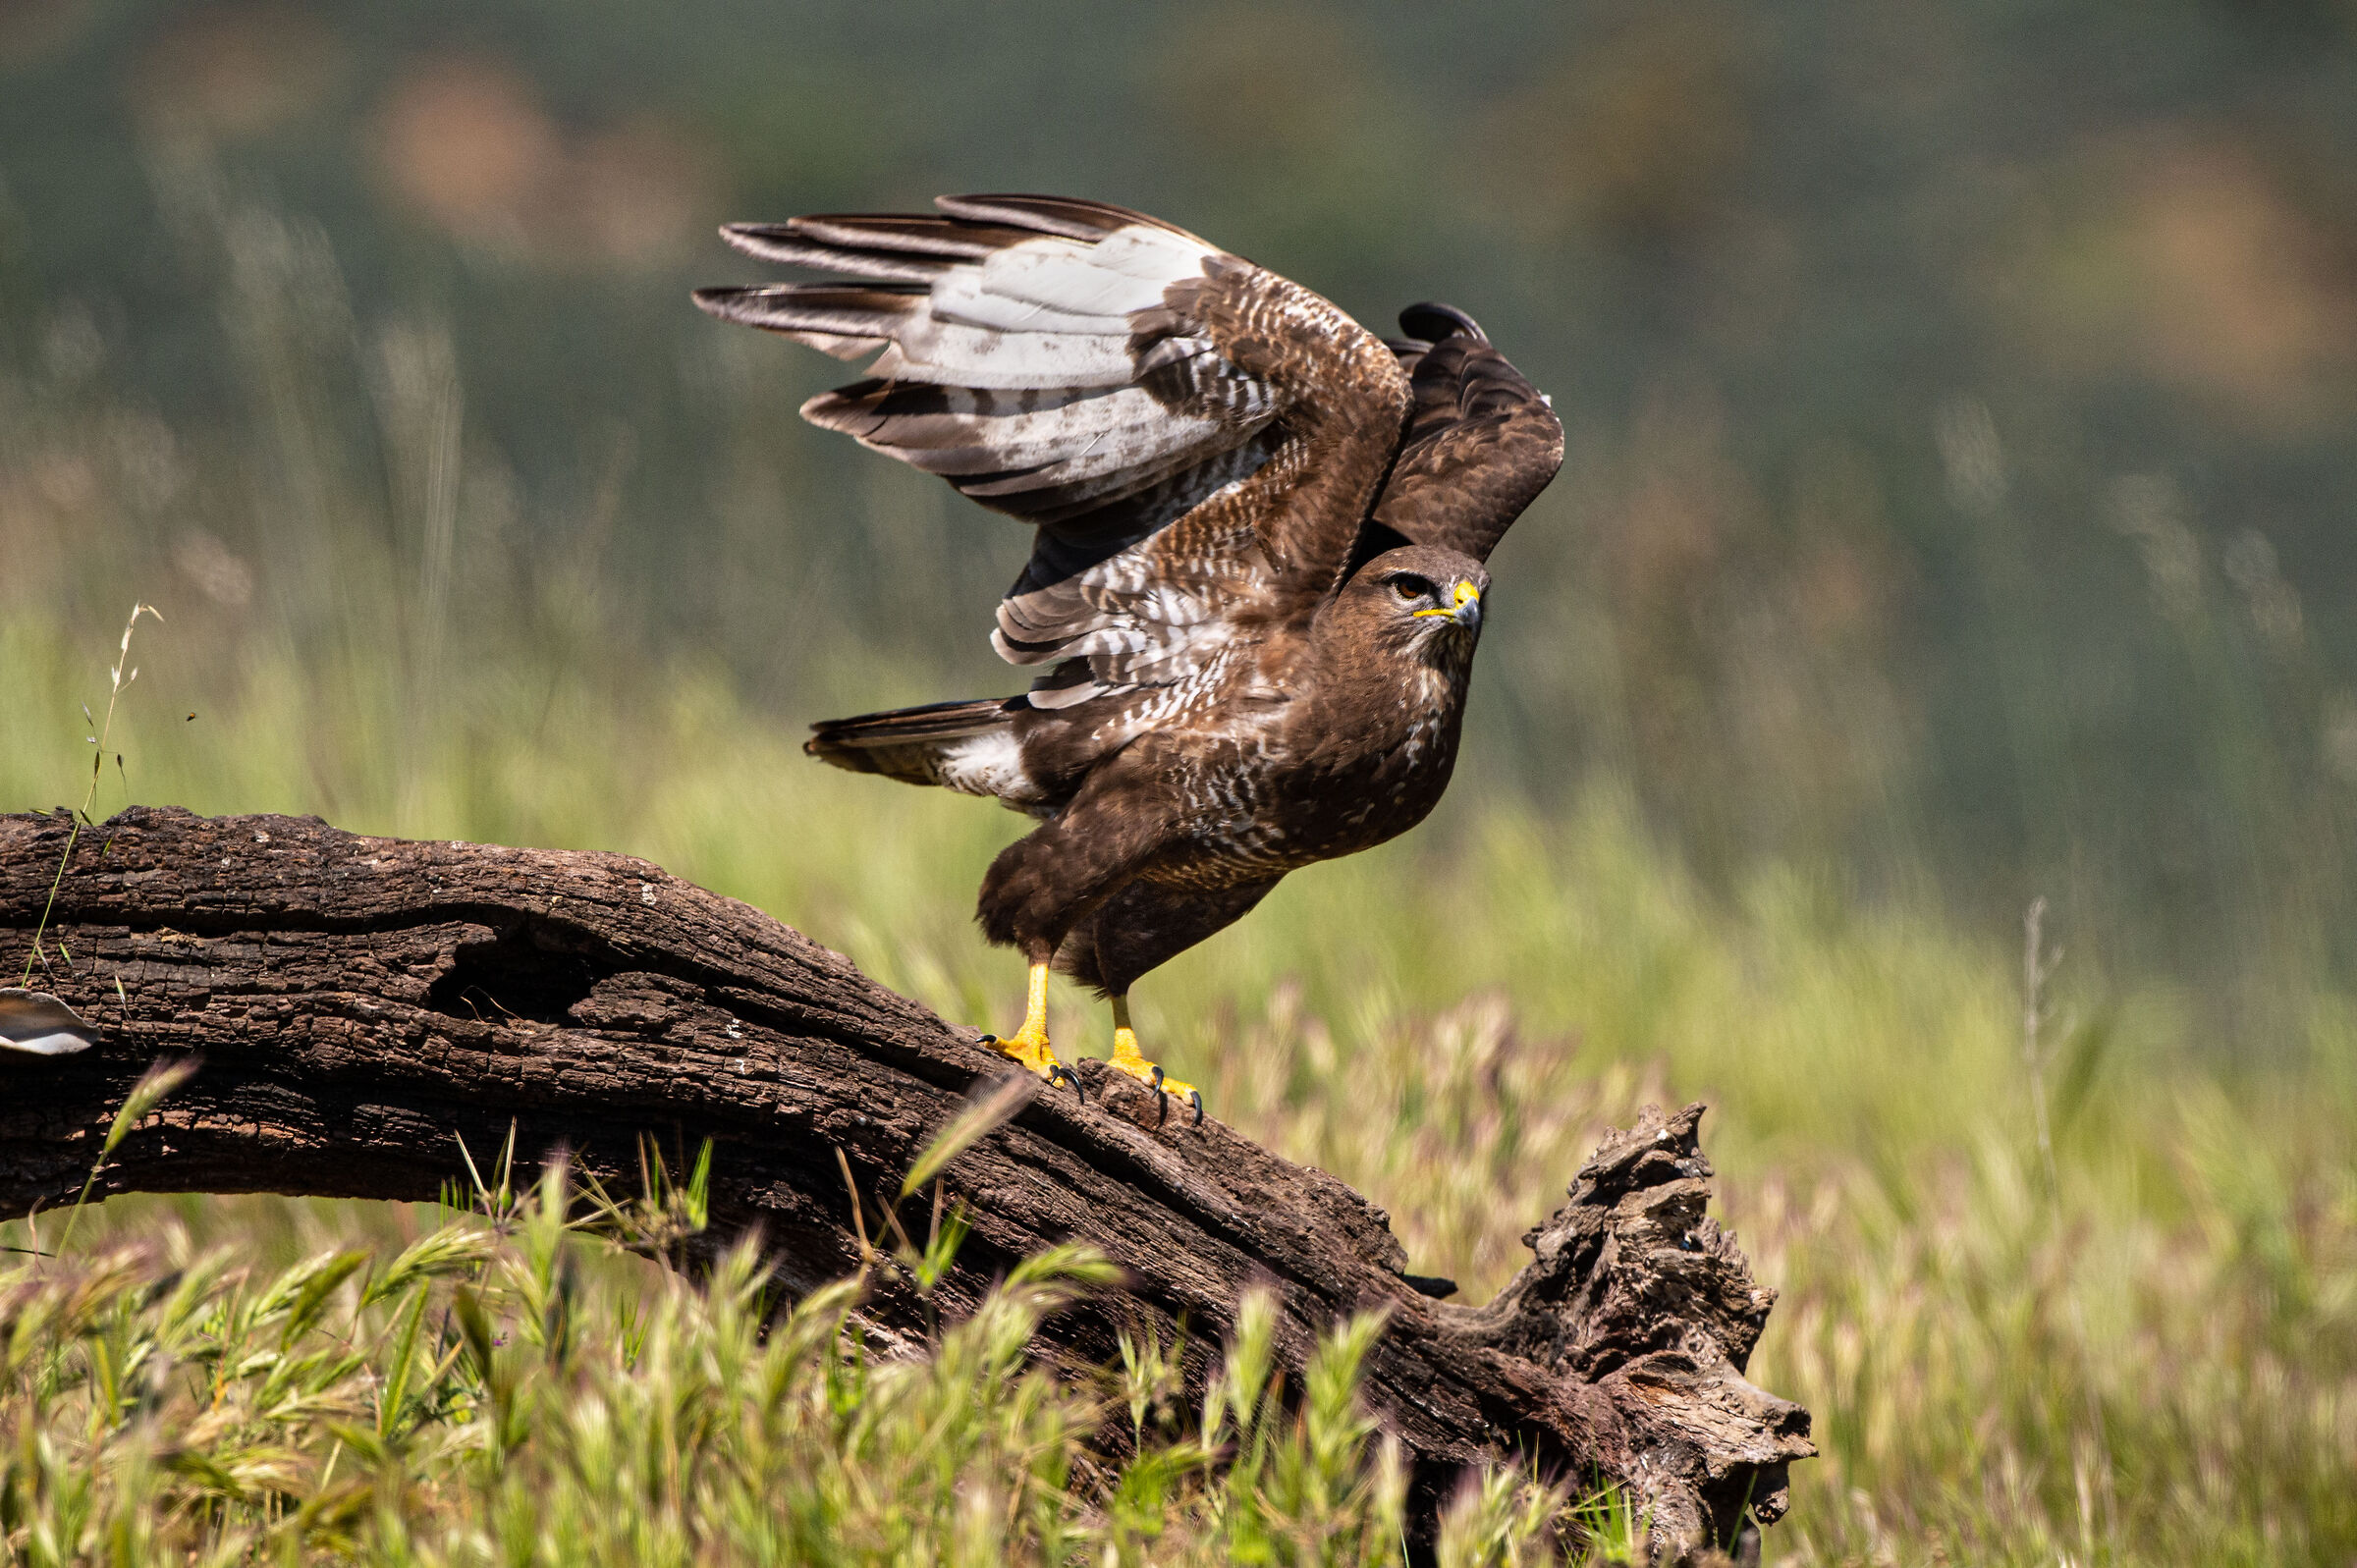 Take-off of the Buzzard...